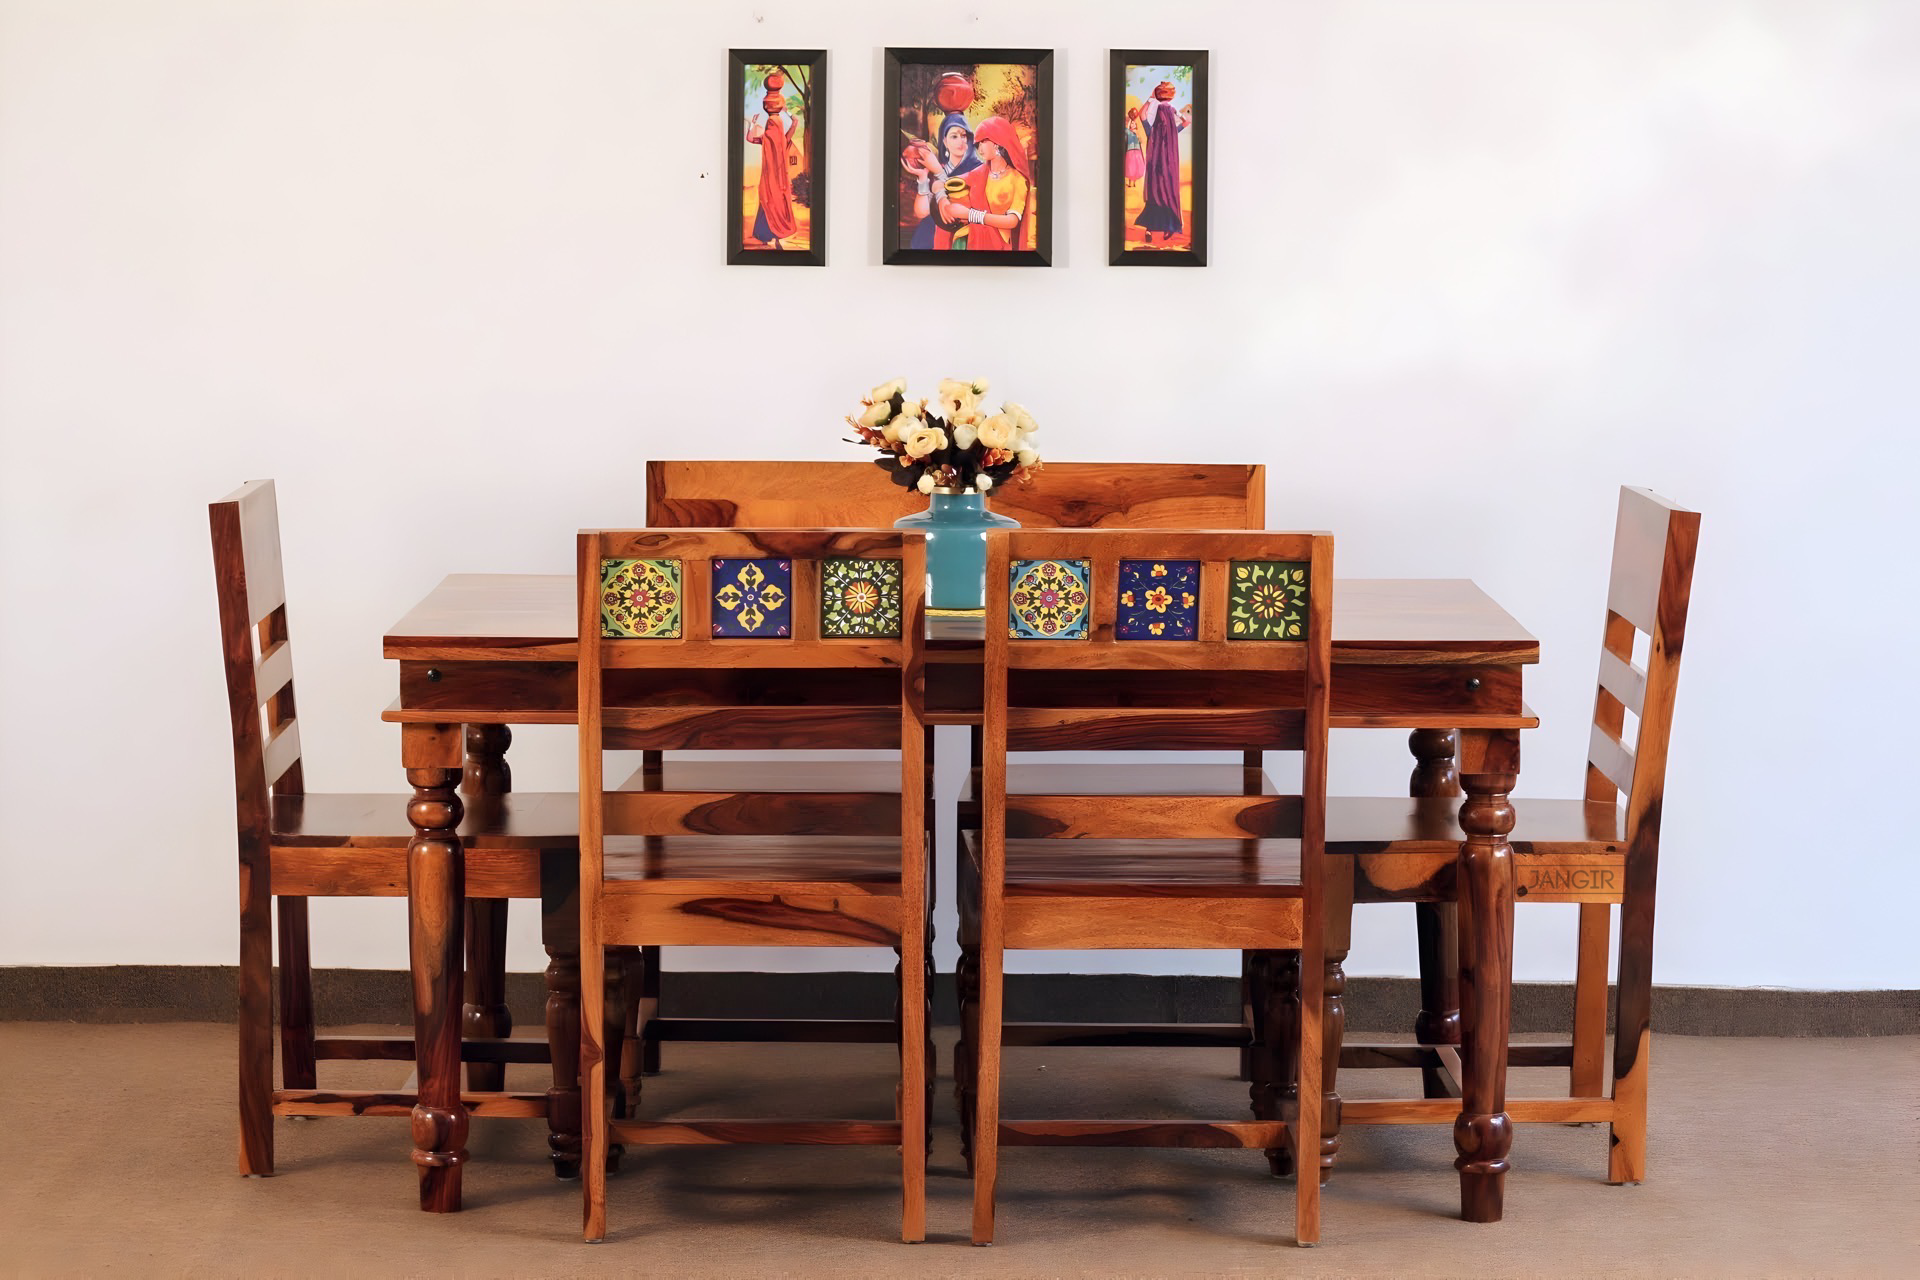 Discover the perfect Rajasthani Style tiles dining table set to complement your dining room, made with sheesham wood. Buy online or in-store for the perfect combination of beauty and durability!